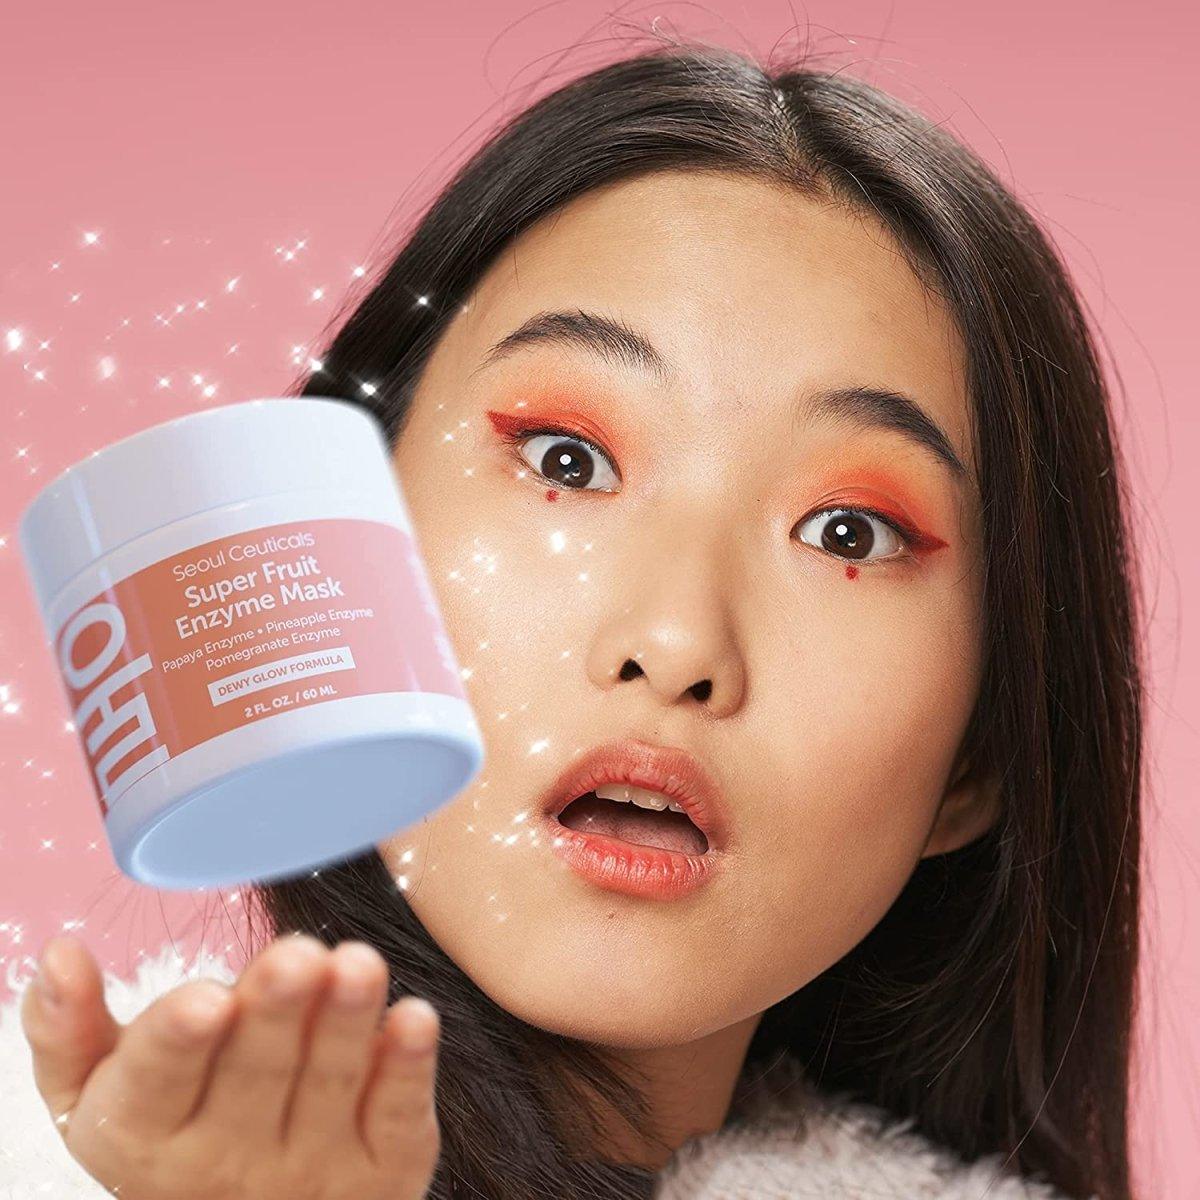 Super Fruit Enzyme Mask - SeoulCeuticals